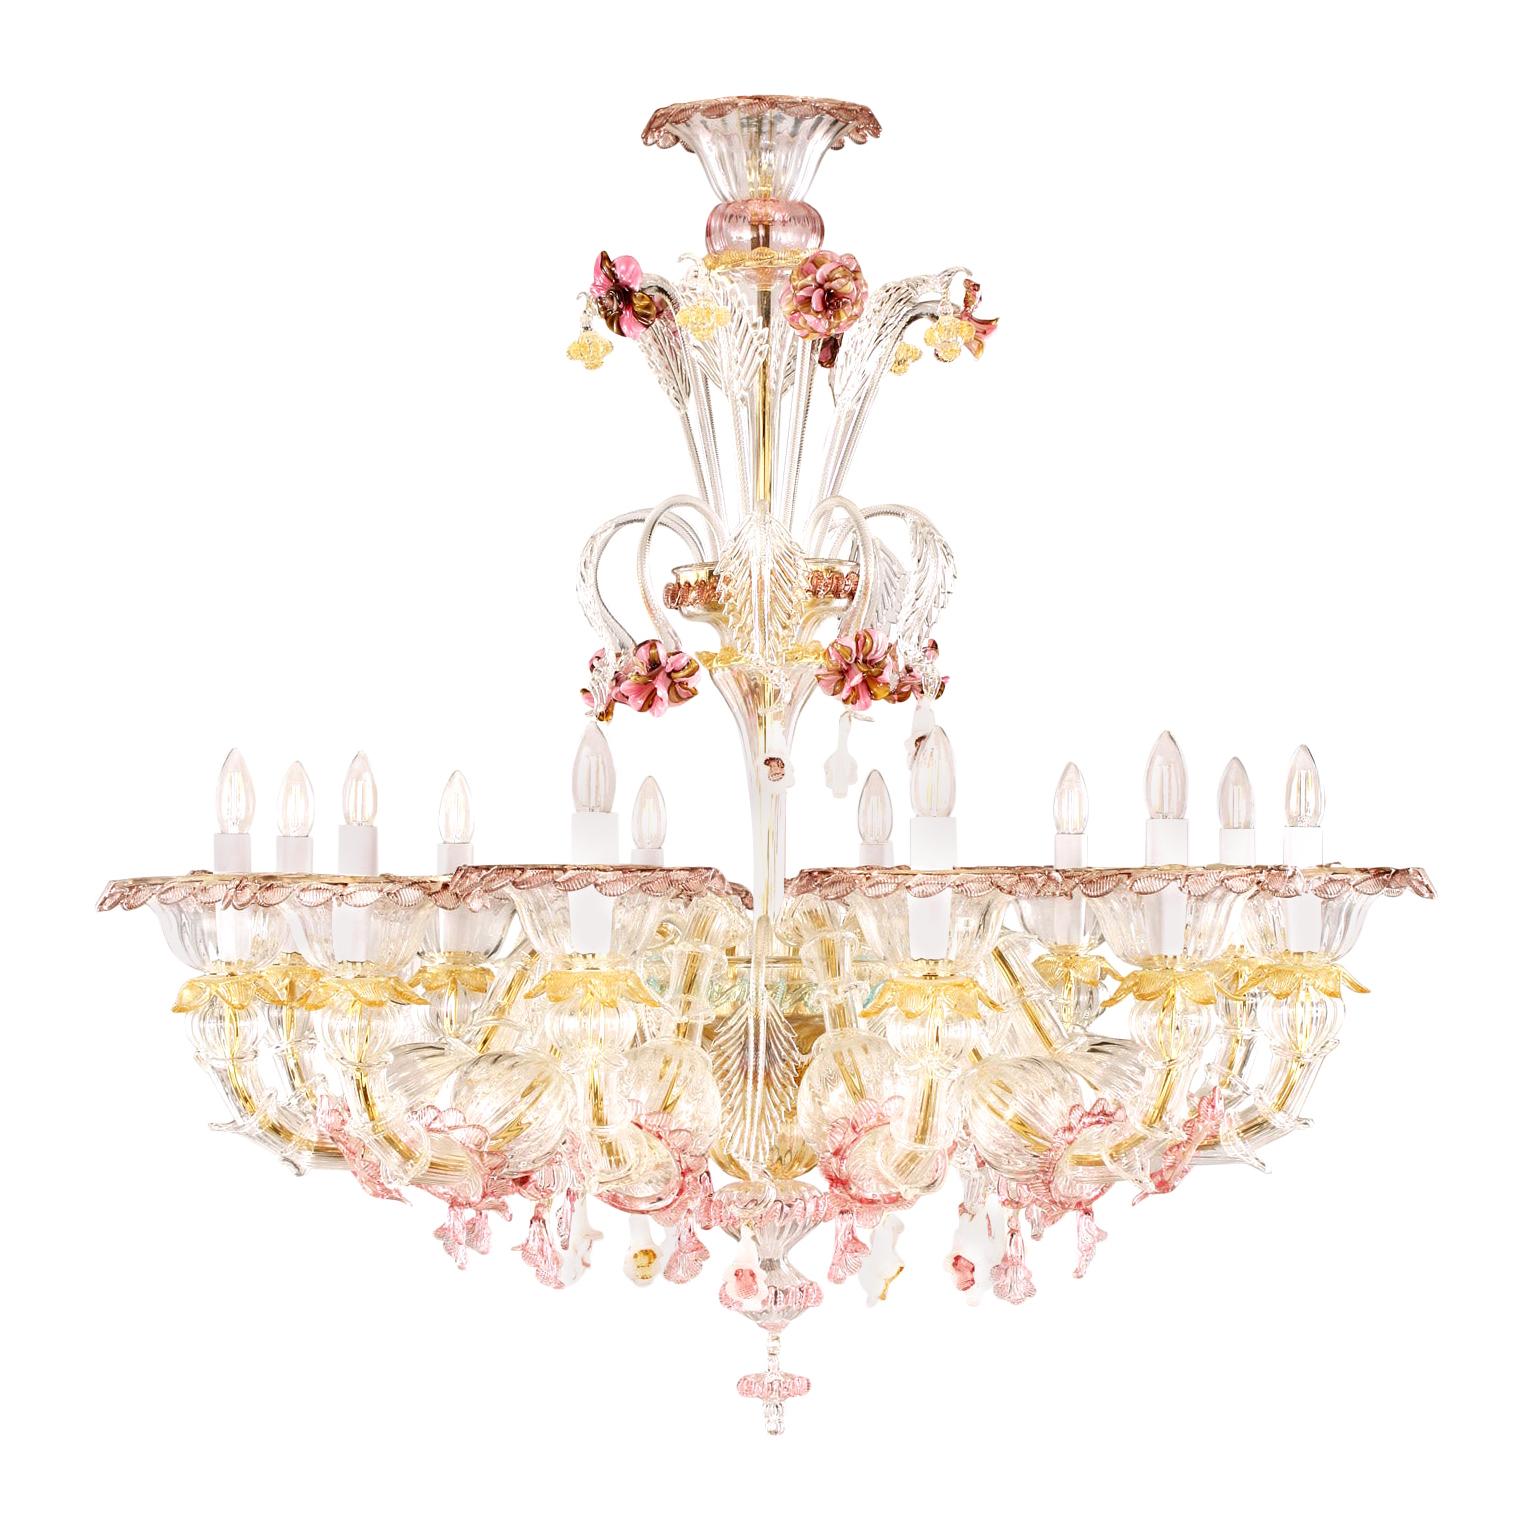 Semi Rezzonico Chandelier 12arms Crystal Glass multicolour Details by Multiforme For Sale